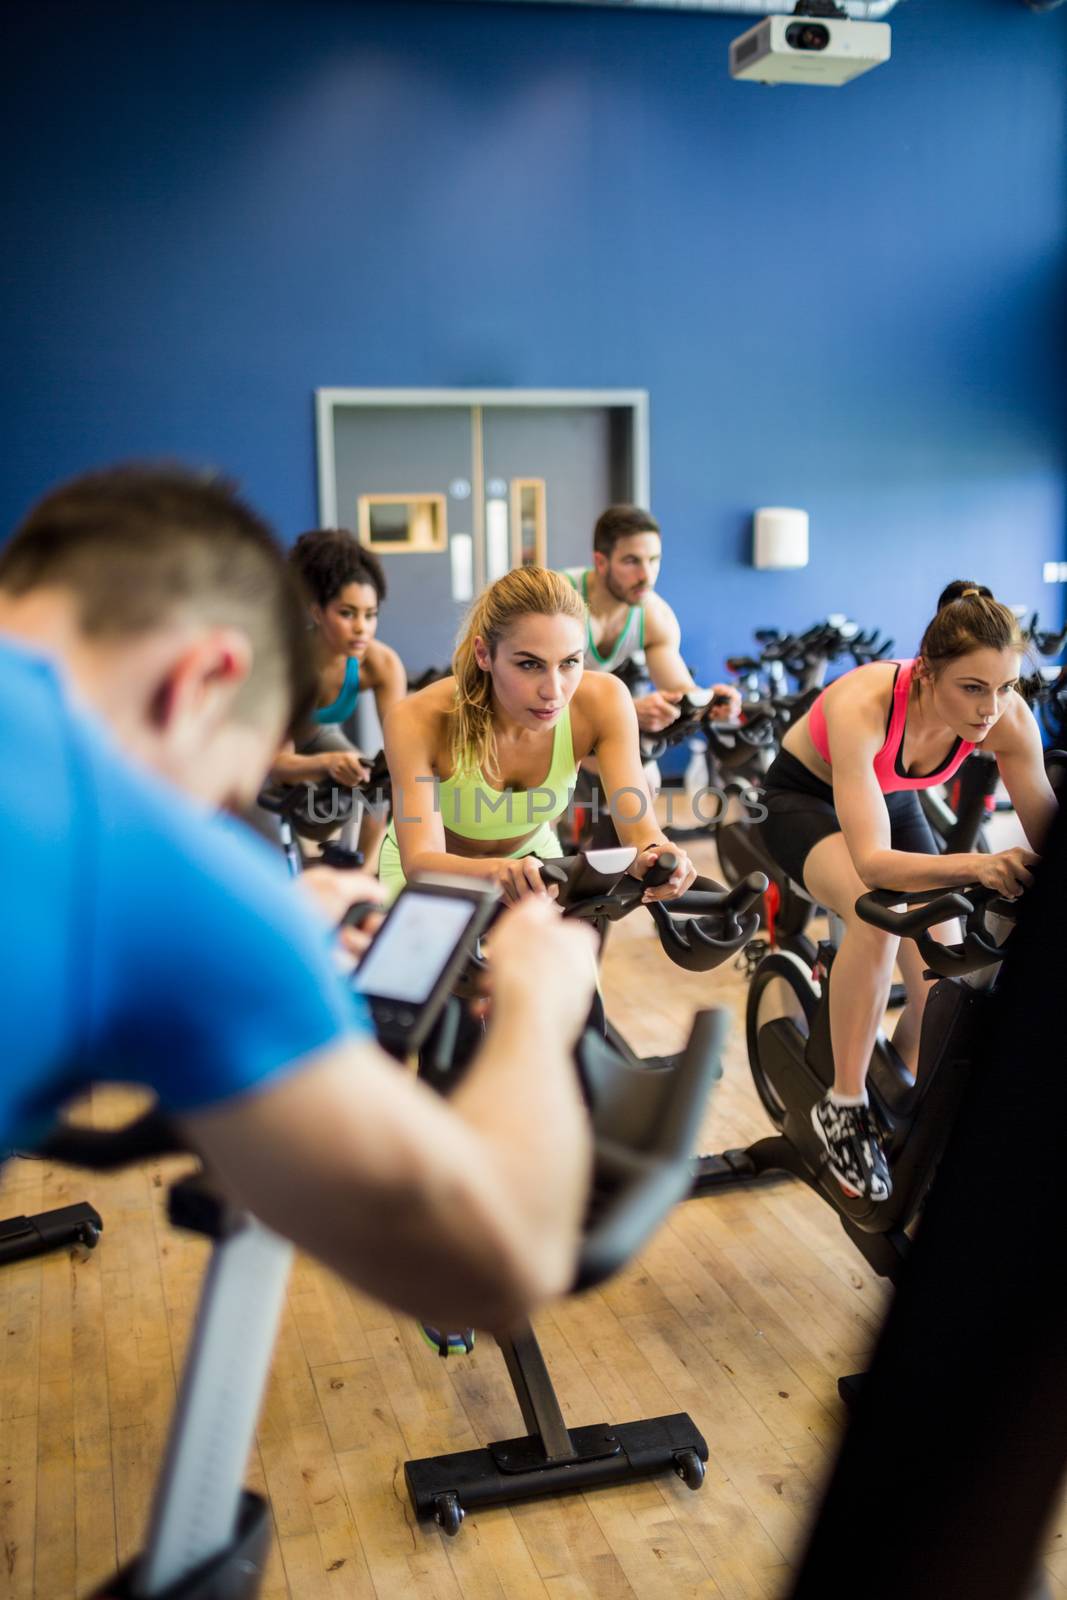 Fit people in a spin class by Wavebreakmedia